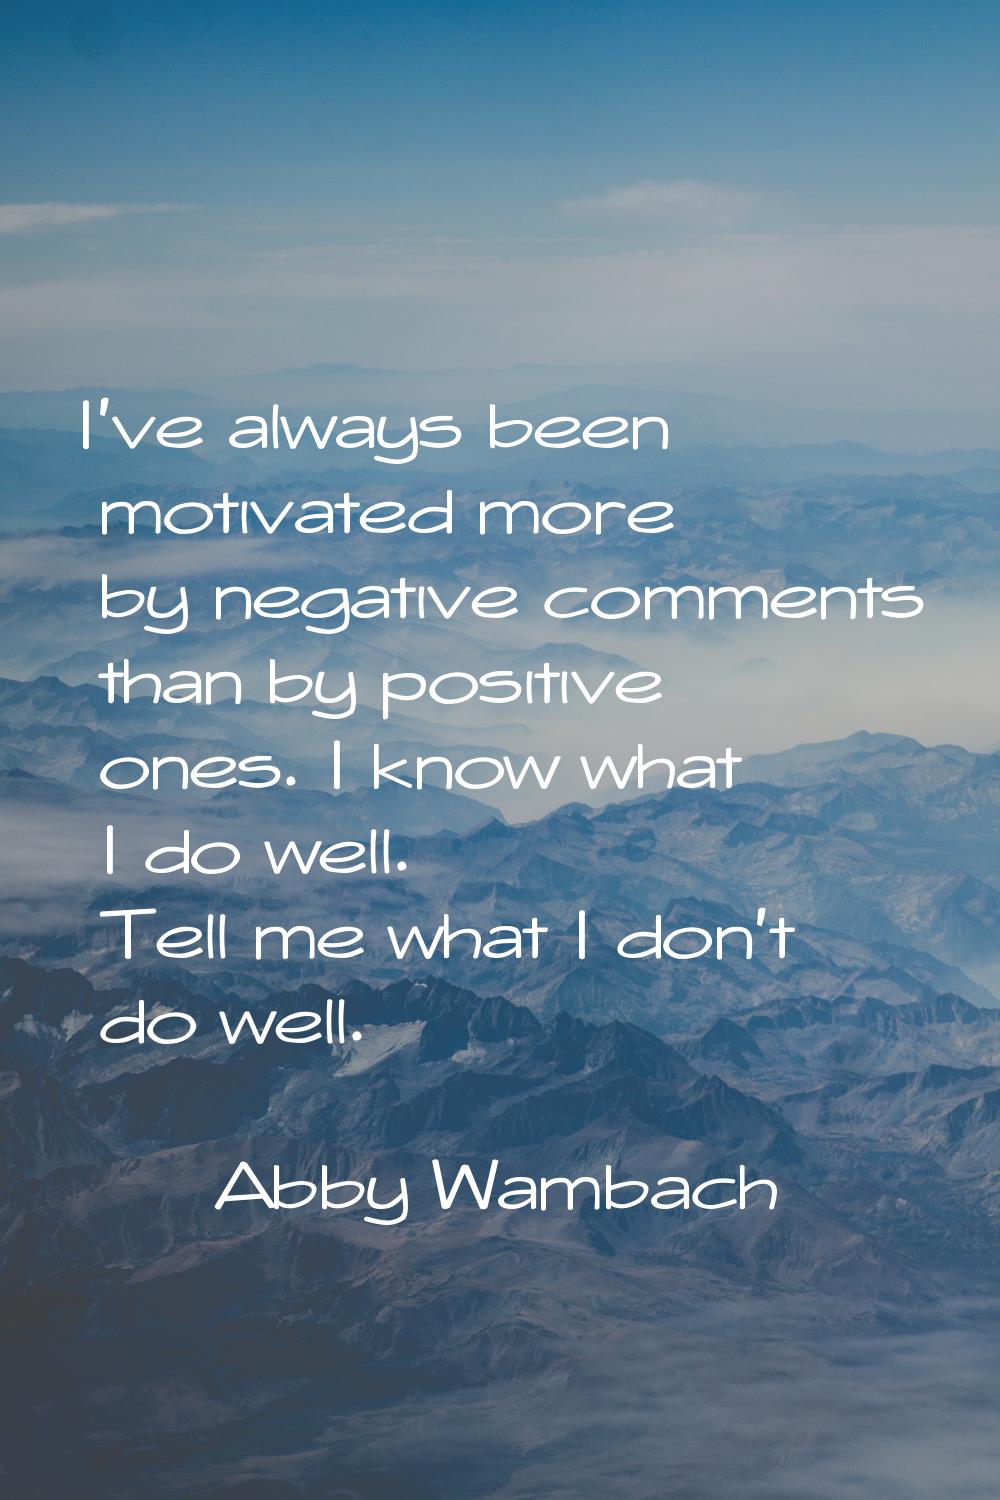 I've always been motivated more by negative comments than by positive ones. I know what I do well. 